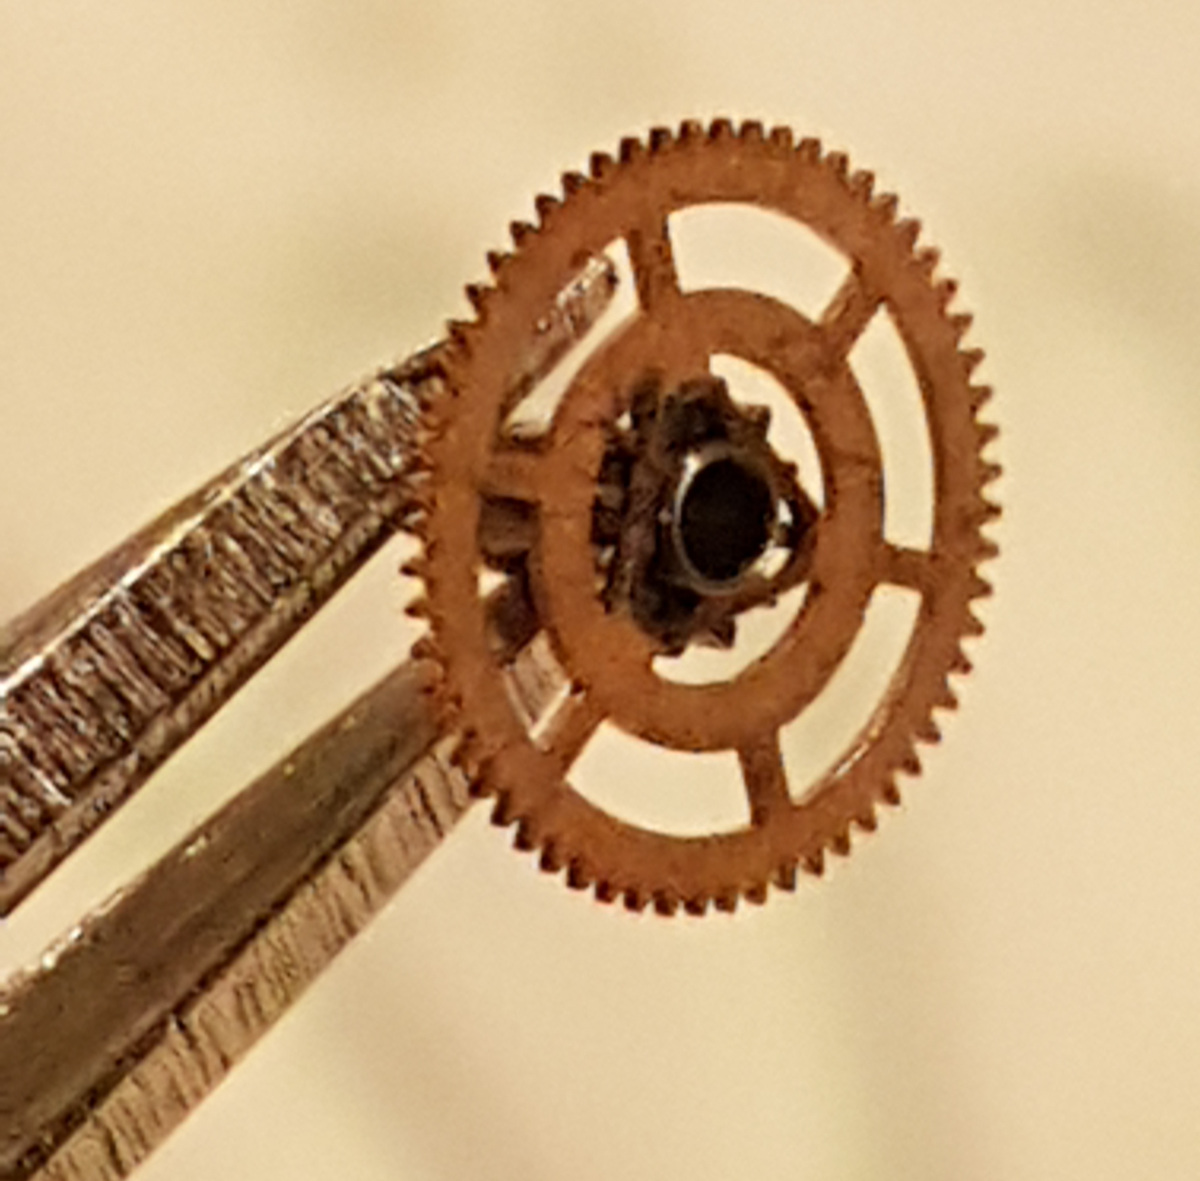 Reassembled cannon pinion and gear